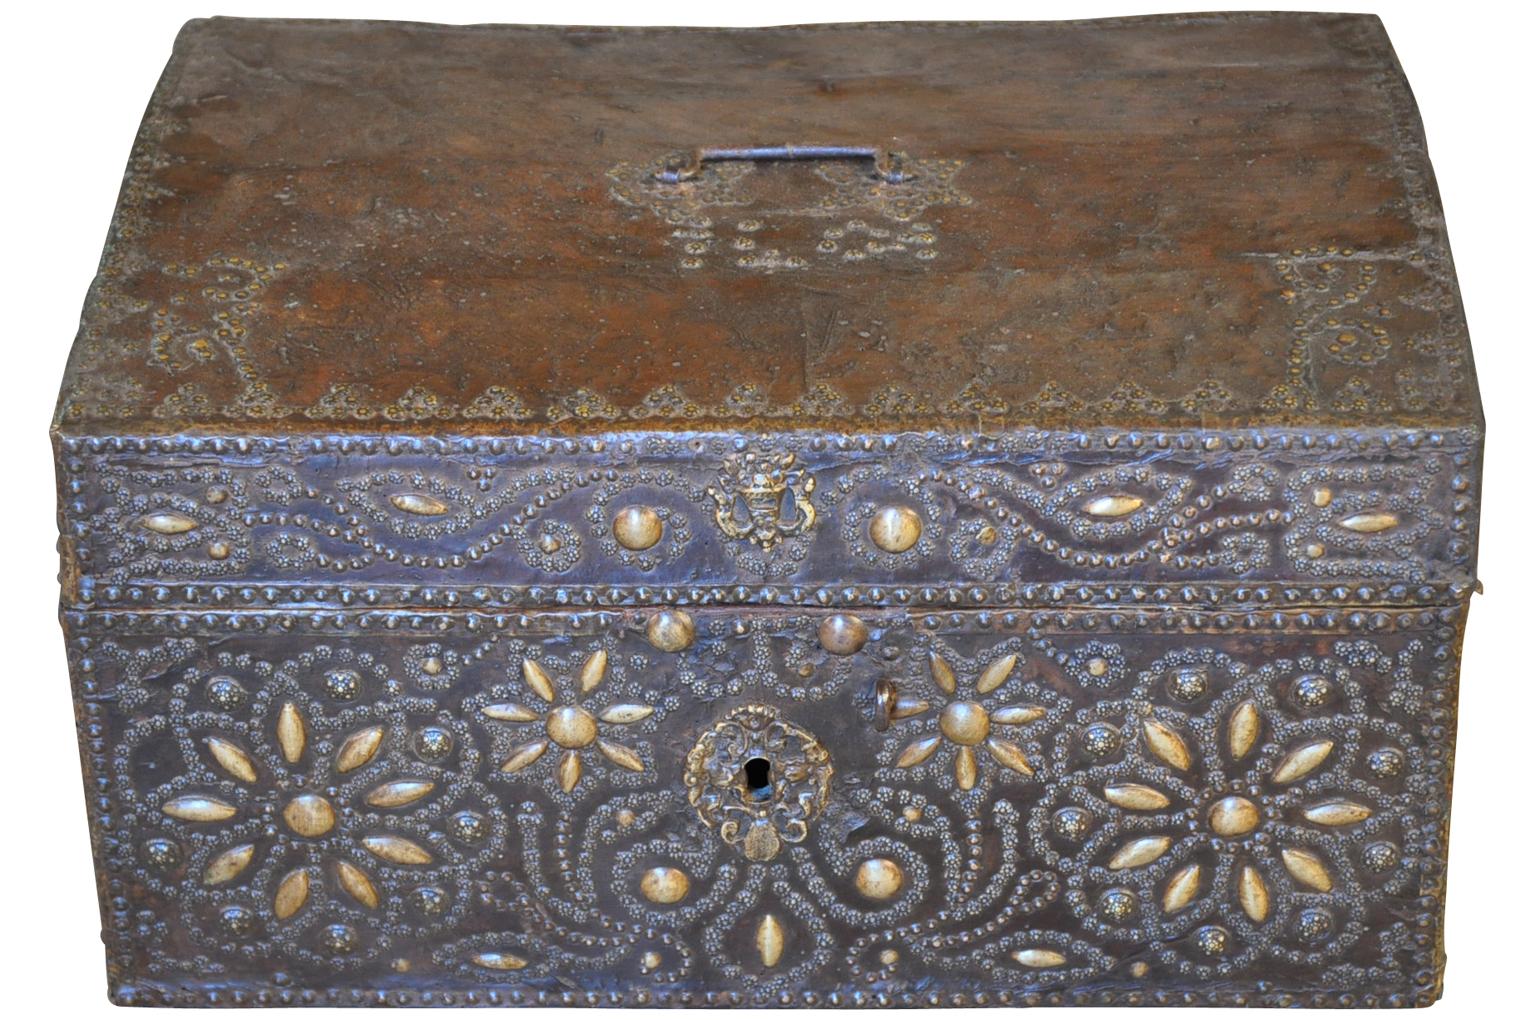 A very beautiful 18th century marriage coffee - or trunk of unusually small proportion. Wonderfully clad in leather with bronze decorative nailhead design.